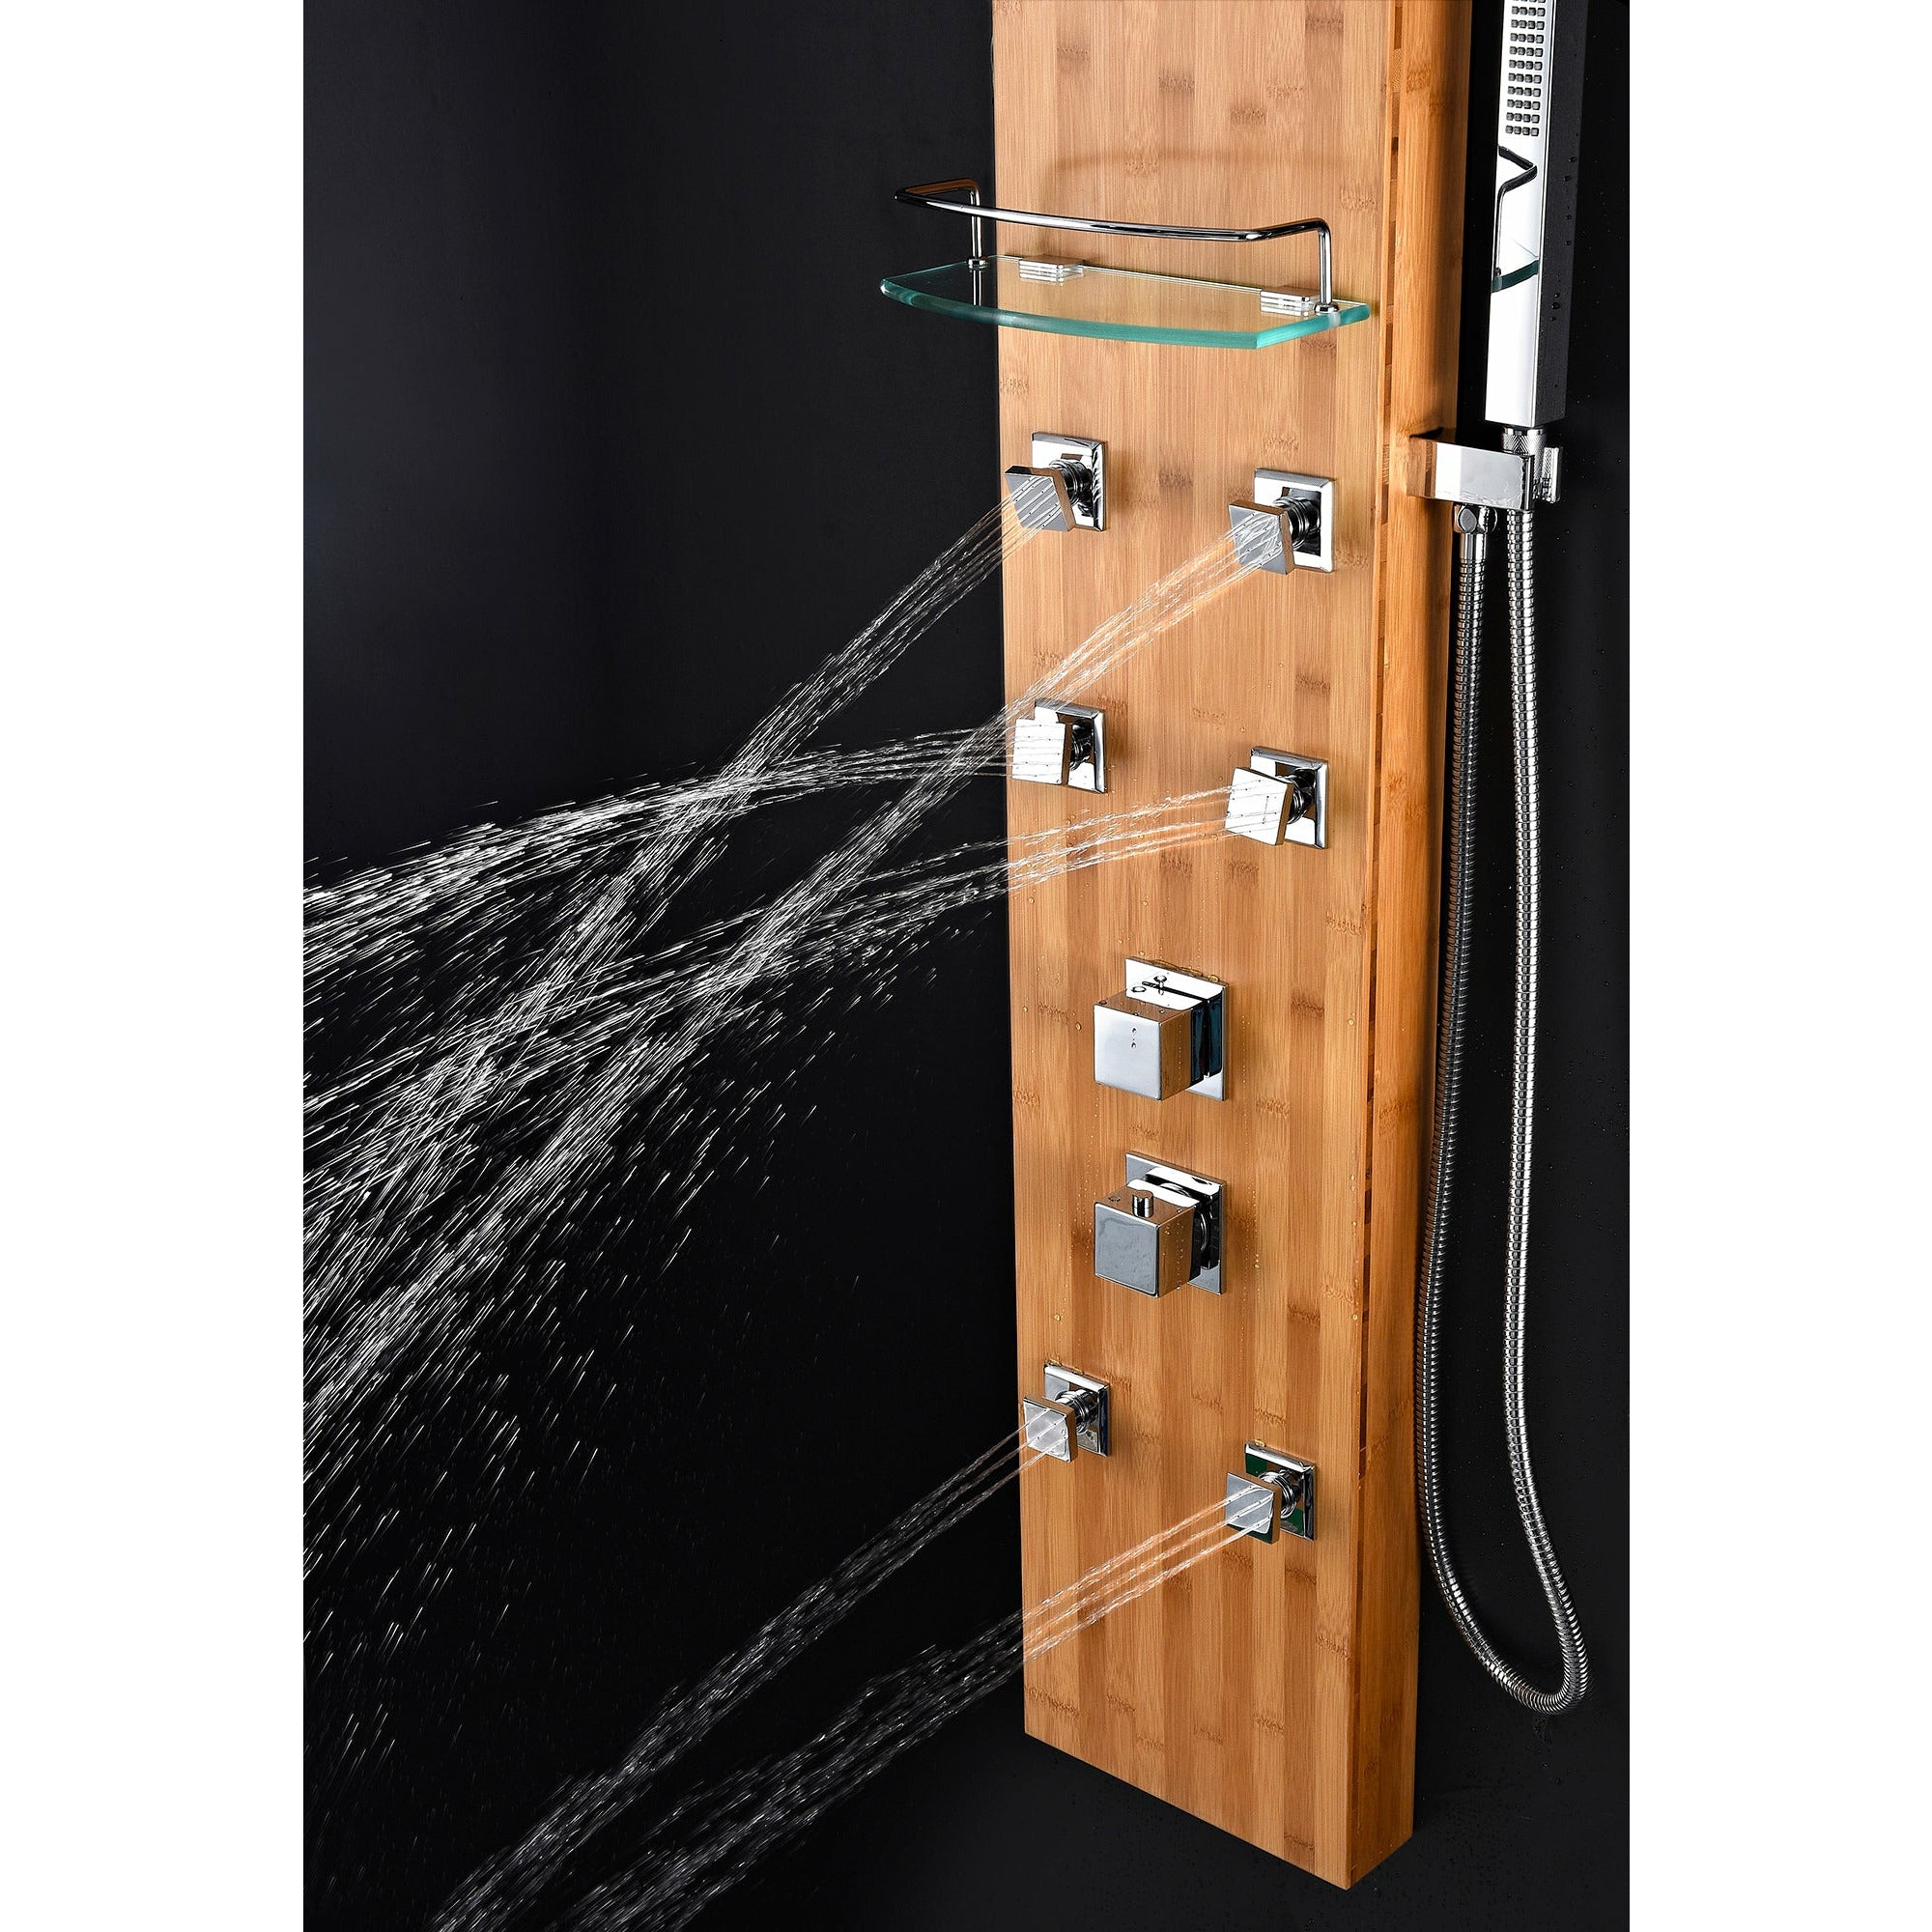 Anzzi Crane 60 Inch Full Body Shower Panel with Deco-Glass Shampoo Shelf, Swiveling Crested Heavy Rain Shower Head, Two Shower Control Knobs, Six Acu-stream Vector Massage Body Jet Sets and Euro-grip Hand Sprayer in Natural Bamboo SP-AZ058 - Vital Hydrotherapy